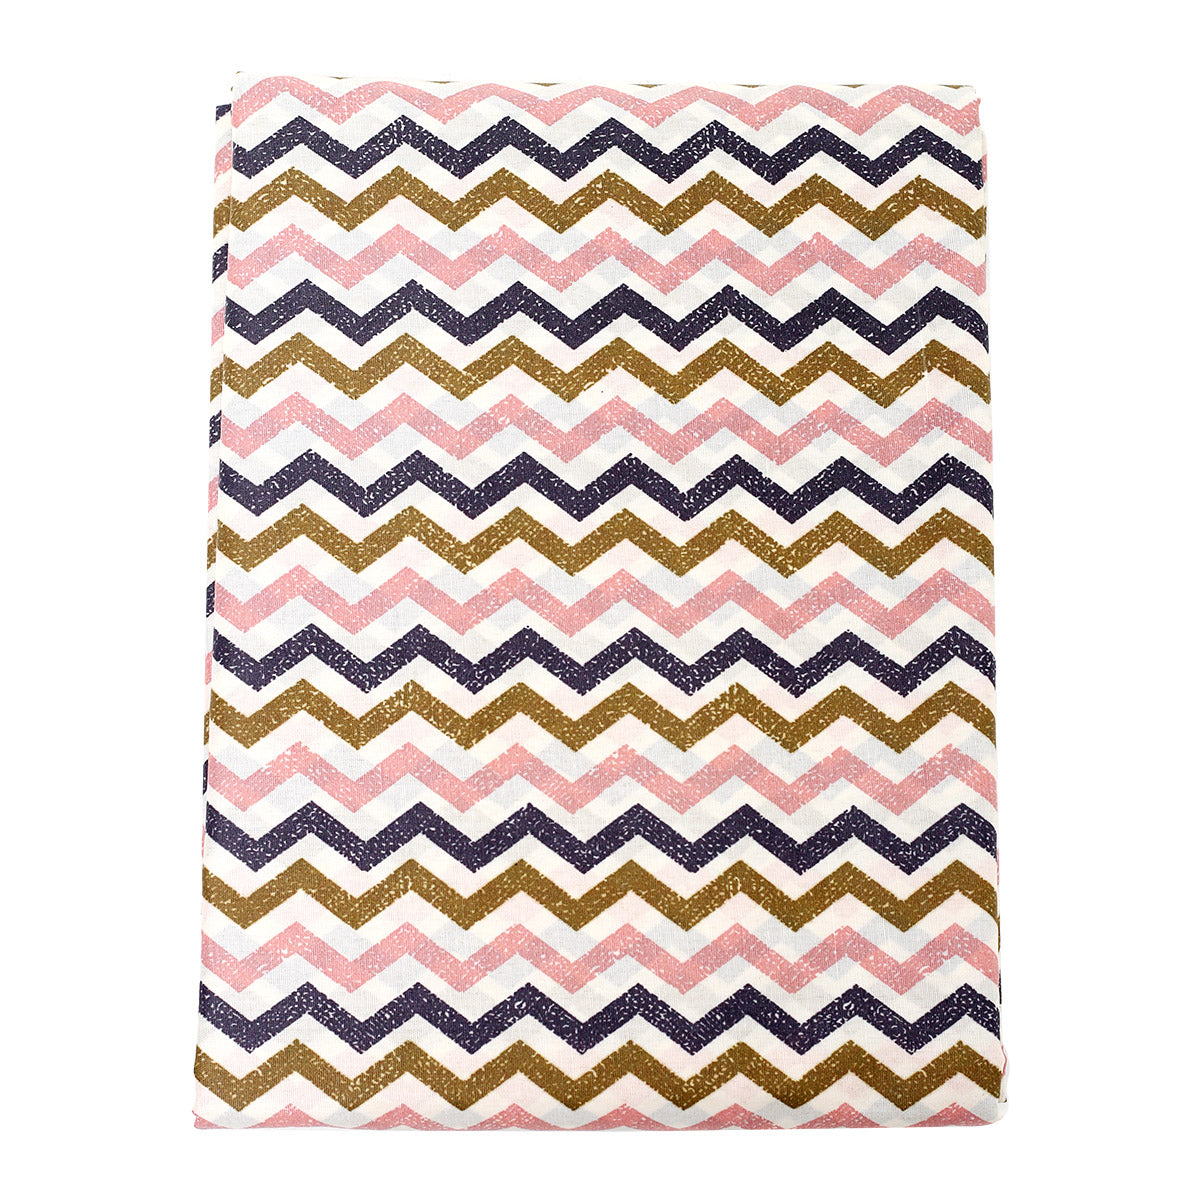 Funly Zig Zag Double Bed Sheet